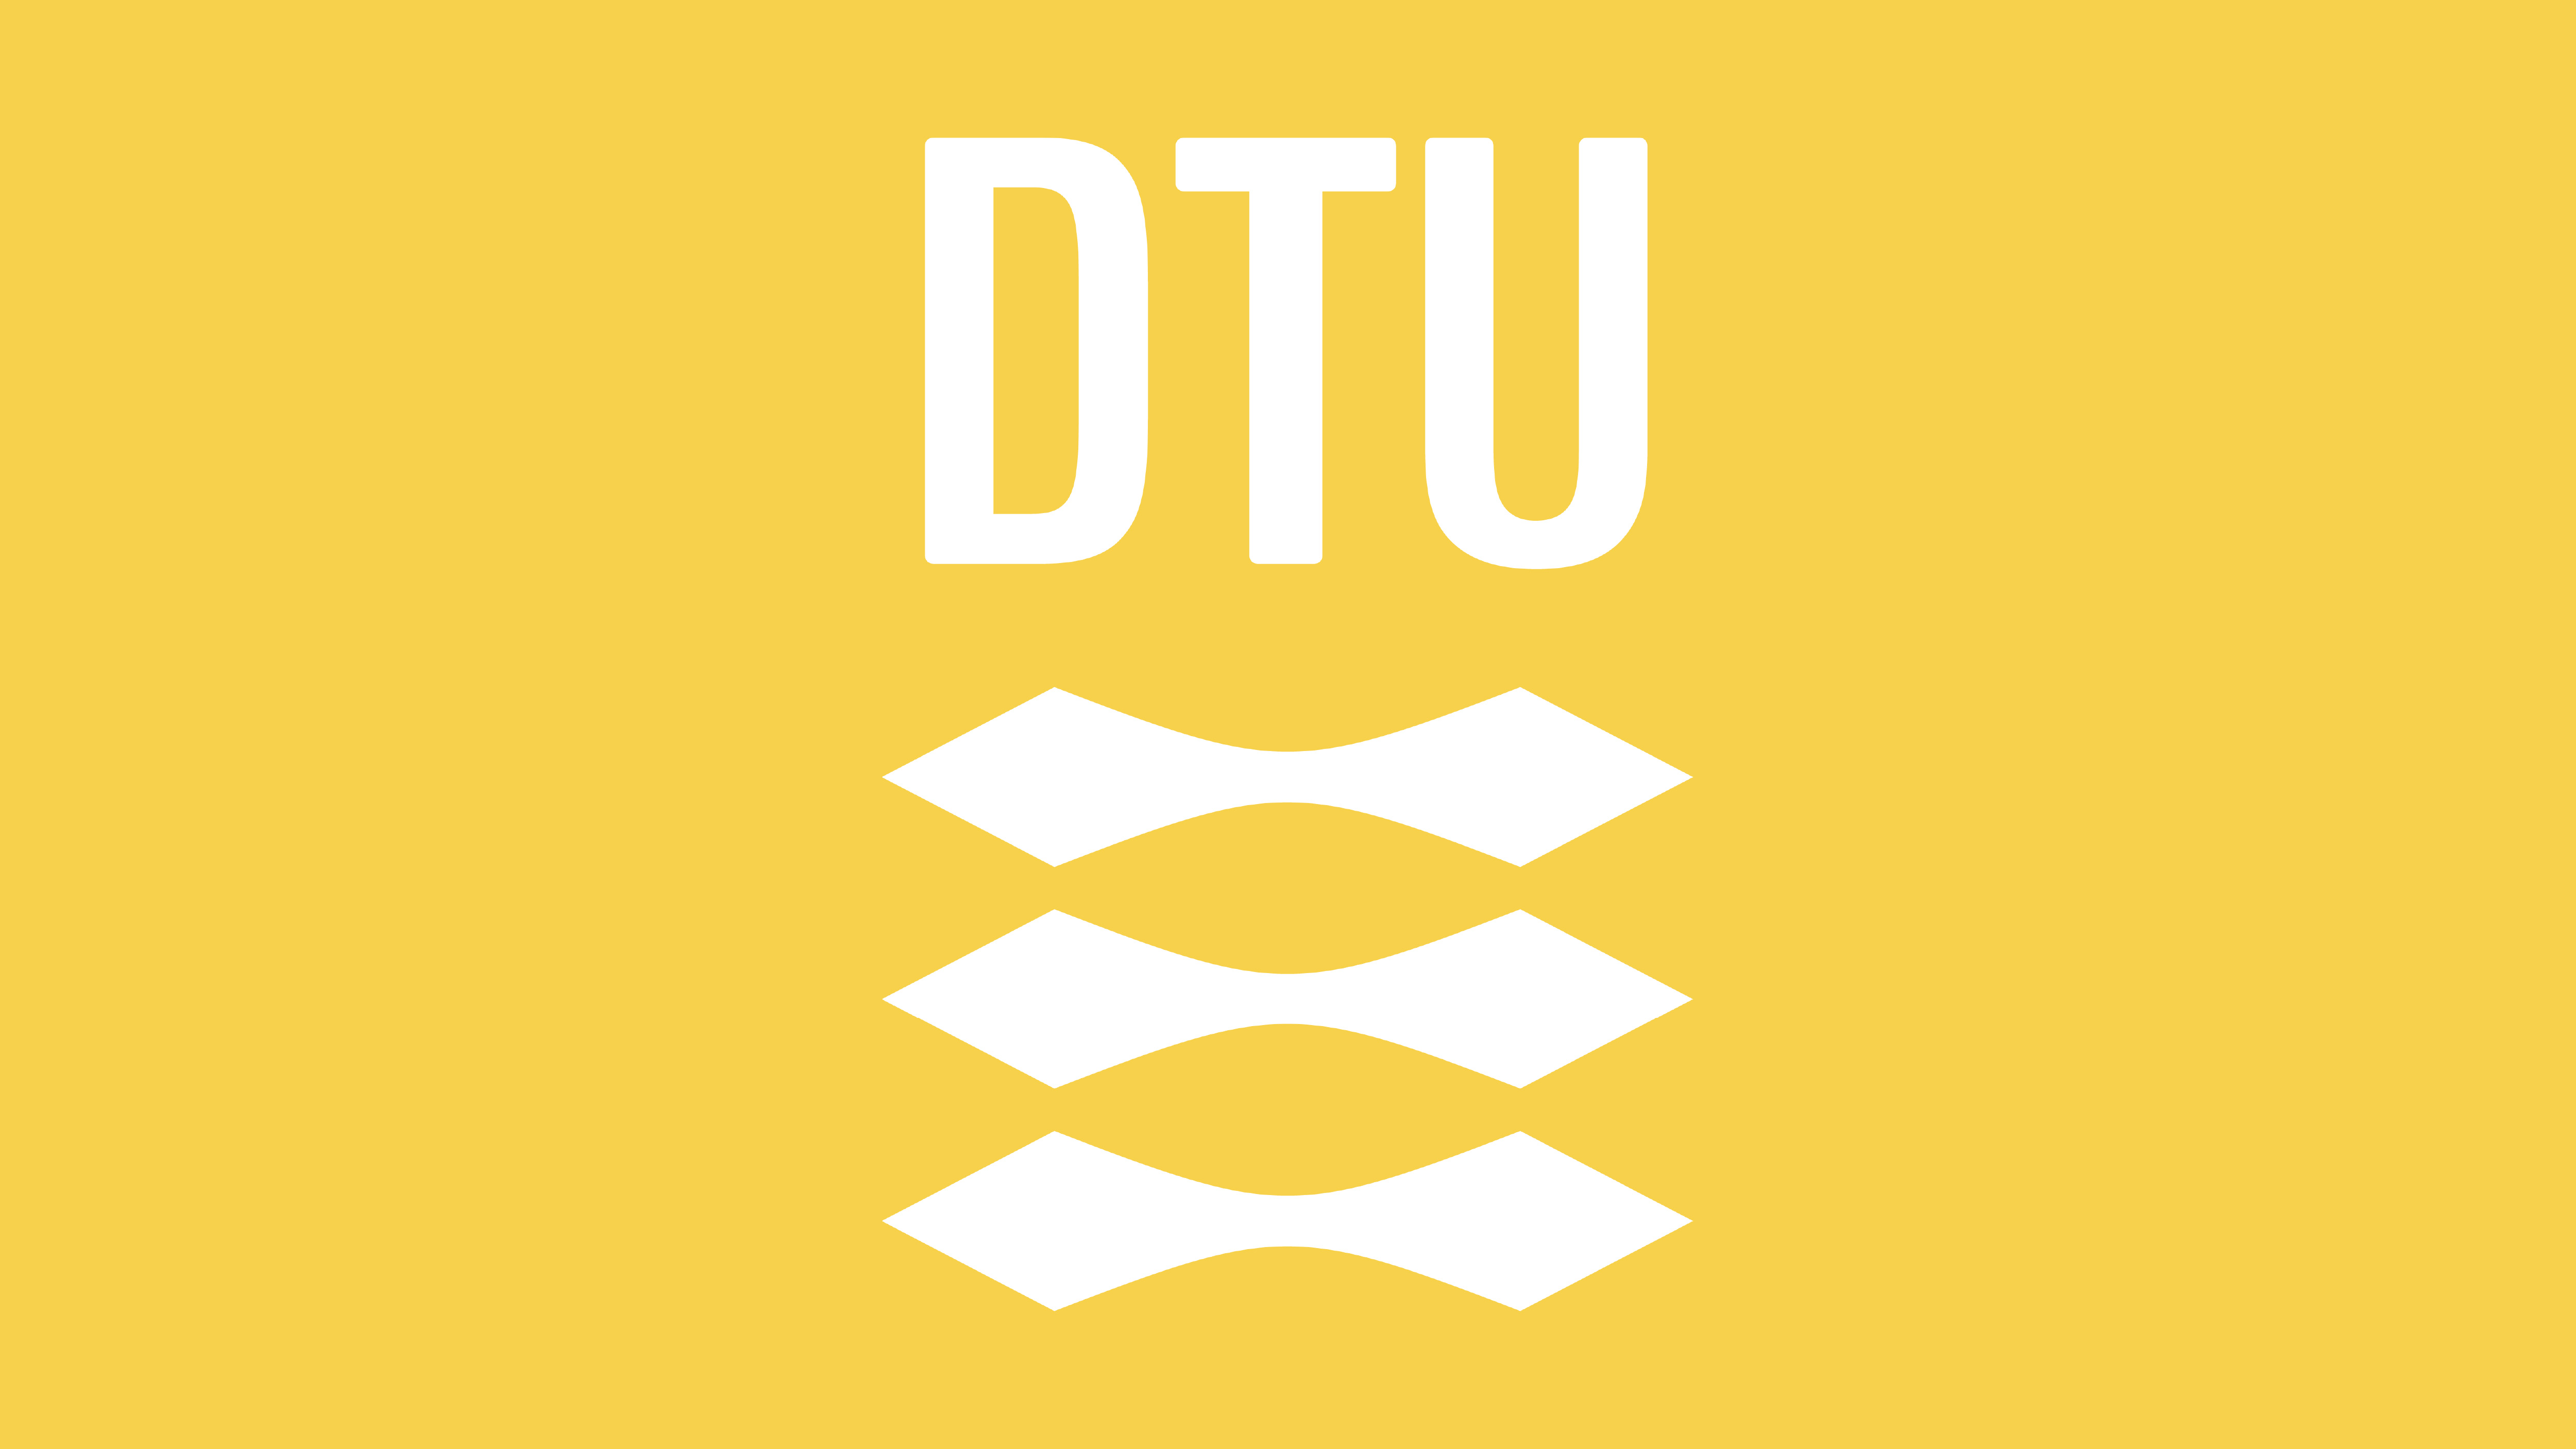 White DTU logo on a yellow background